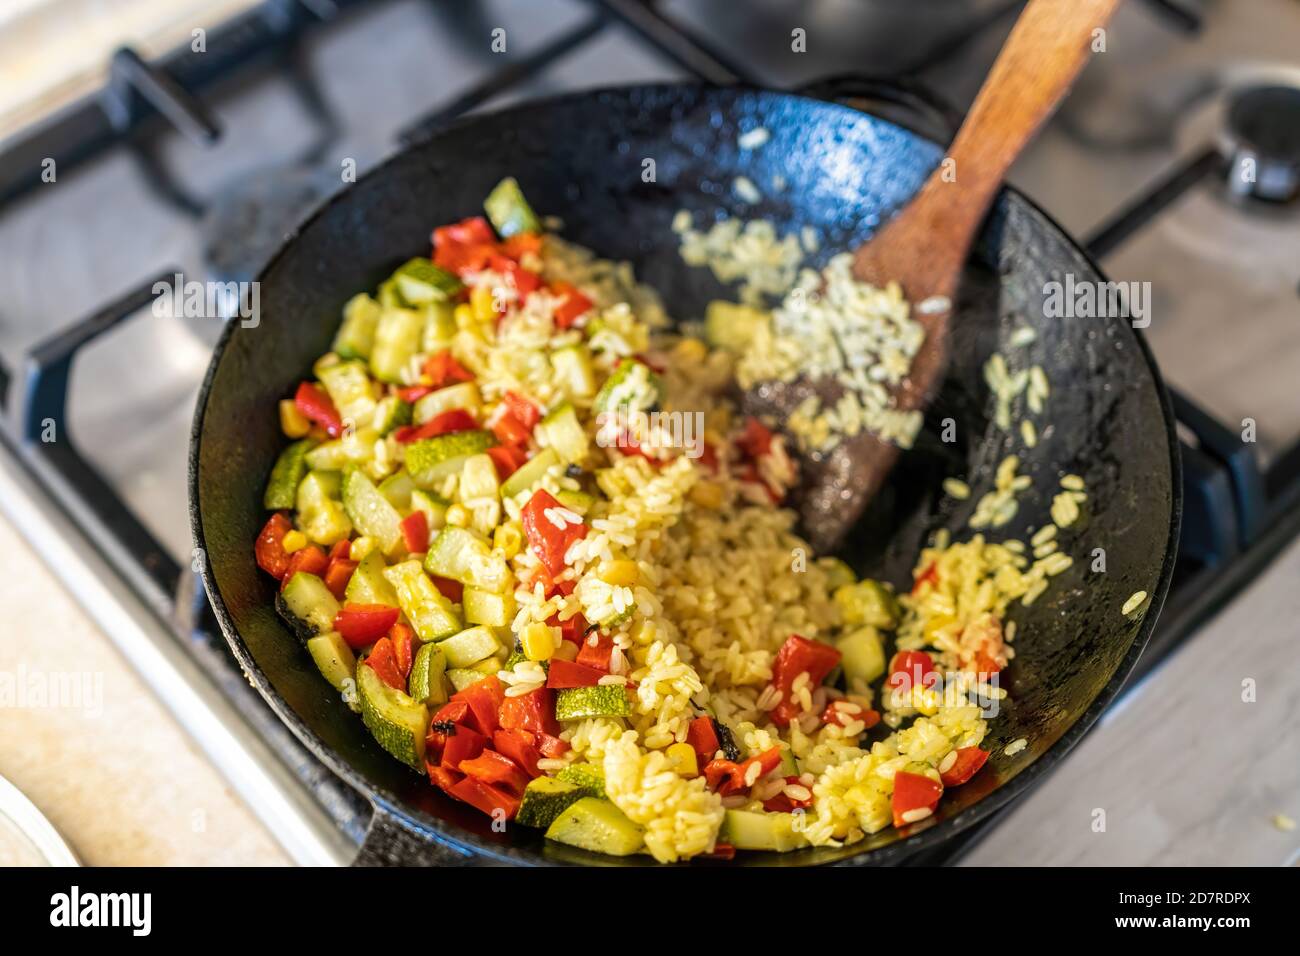 A Big Pilaf Pan Bowl With Mix Of Vegetables Cooking On The Kitchen Rice With Red Beans And Vegetables In A Frying Pan Stock Photo Alamy